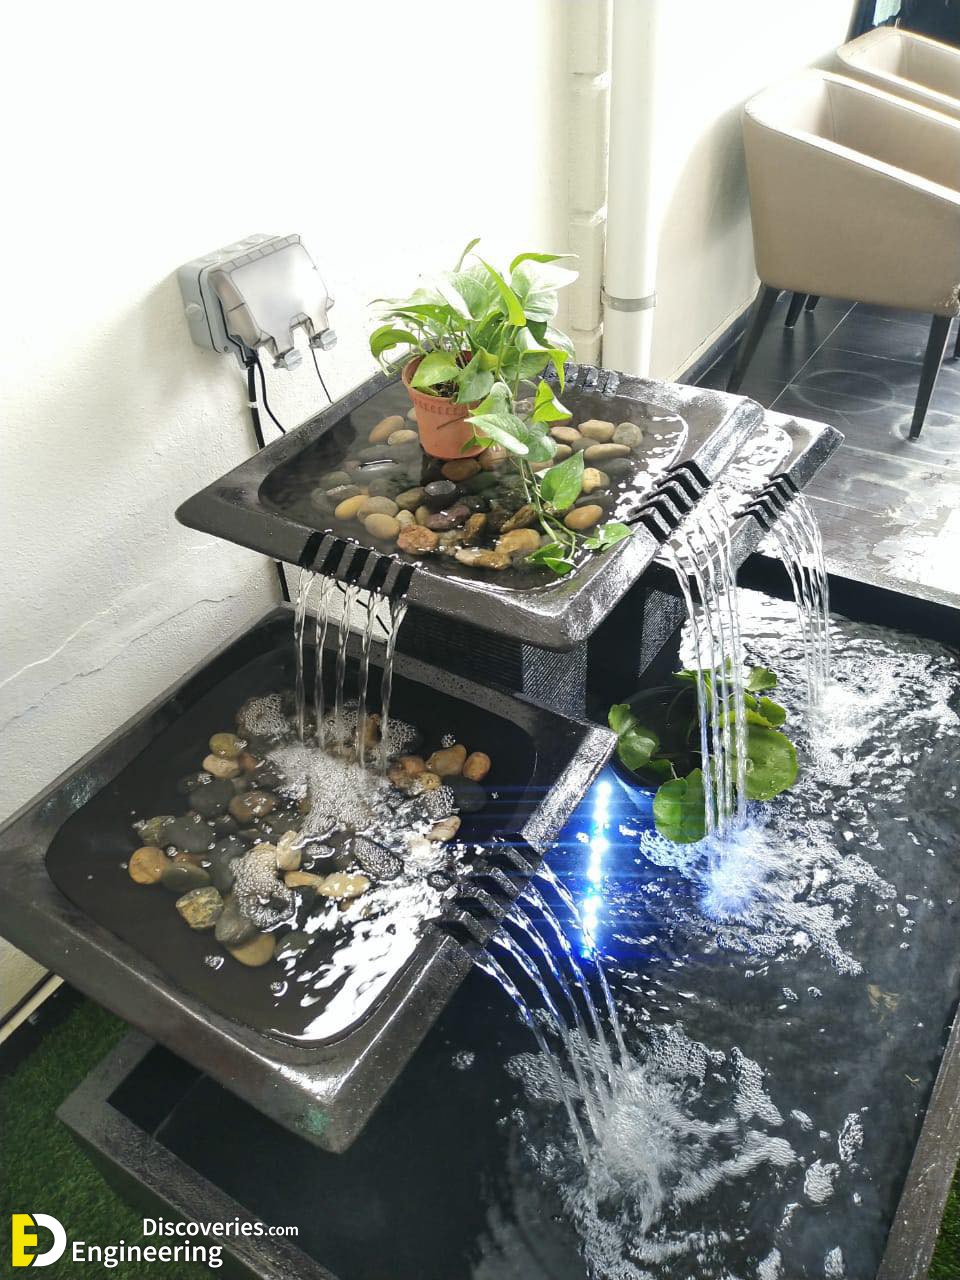 6 engineering discoveries amazing water fountain ideas to transform your home into a serene oasis